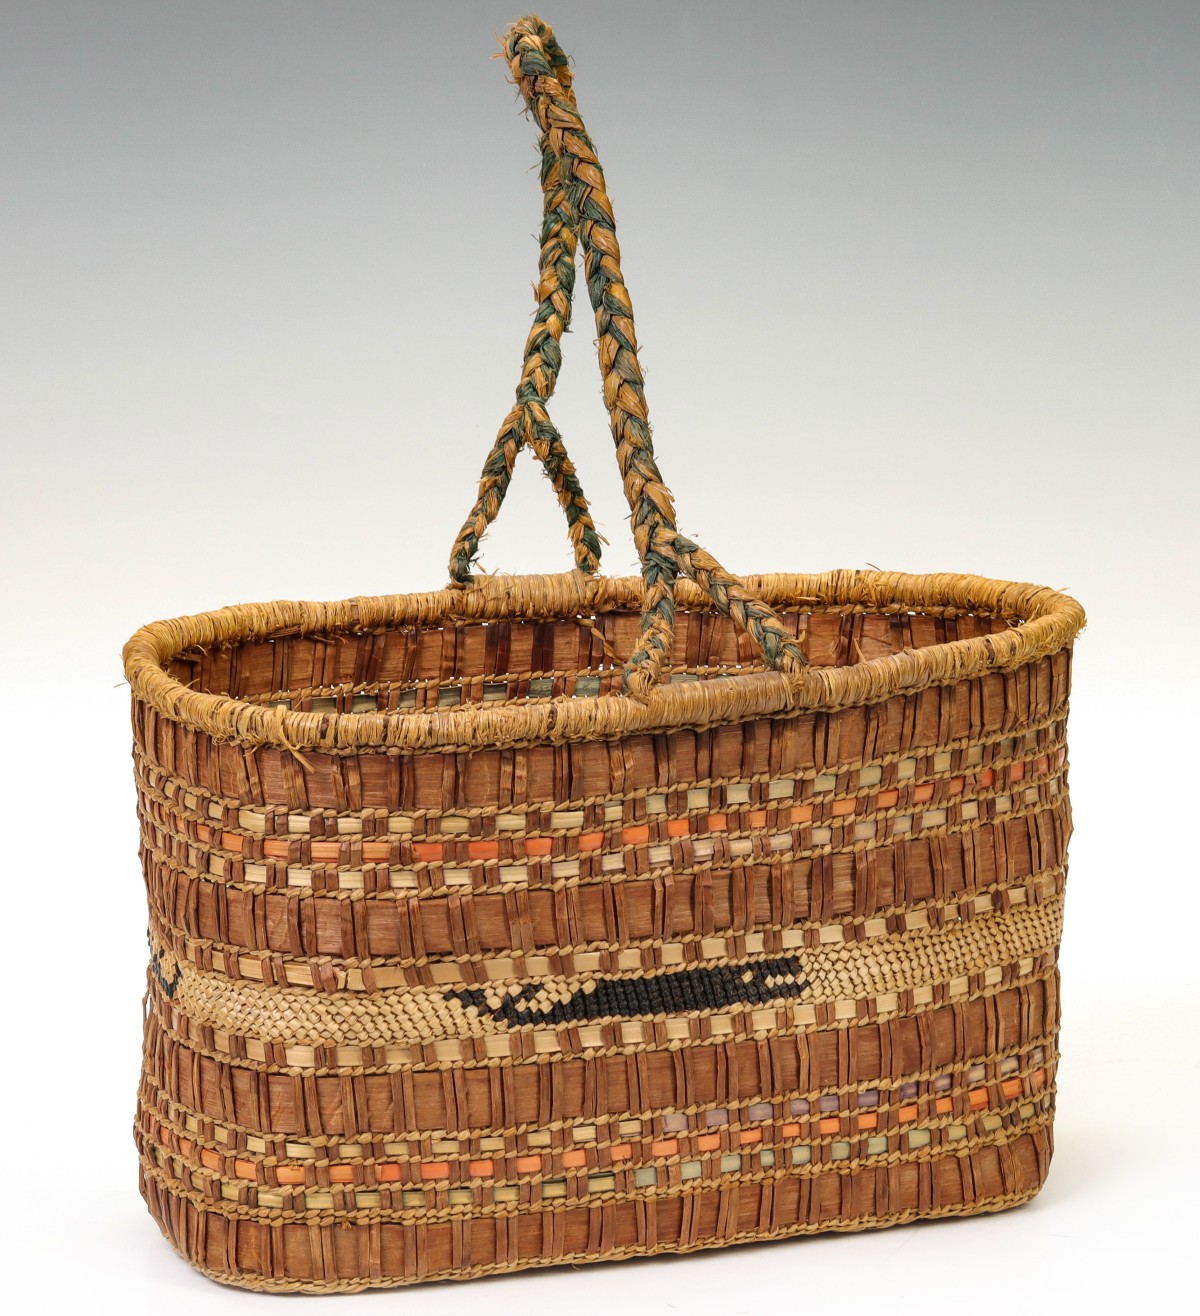 A MAKAH NORTHWEST COAST PICTORIAL BASKET WITH HANDLES